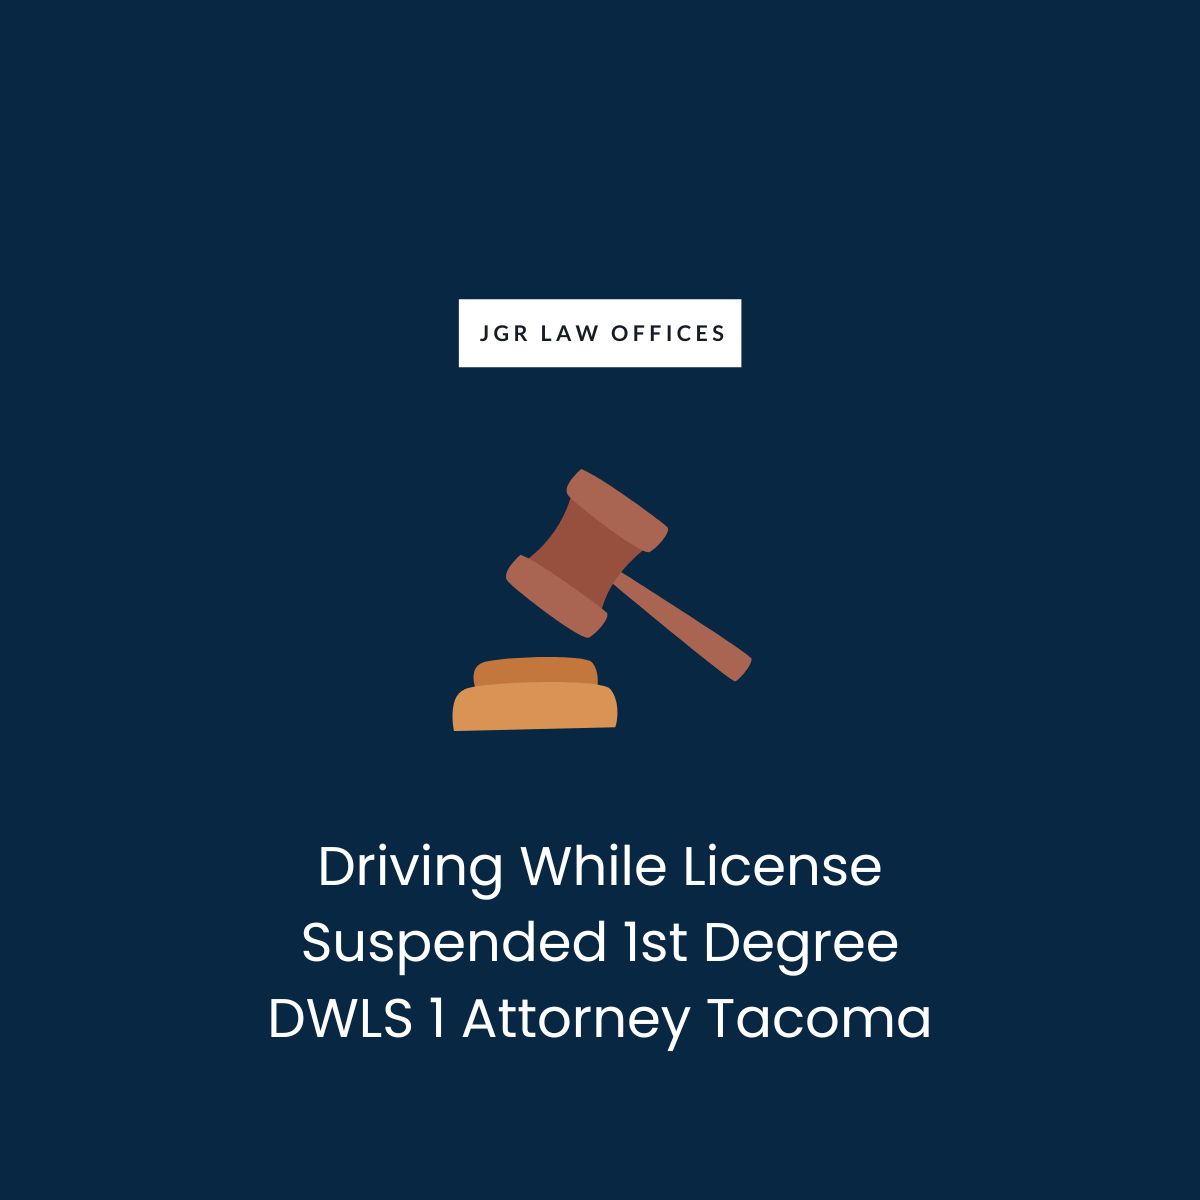 Driving While License Suspended 1st Degree DWLS 1 Attorney Tacoma